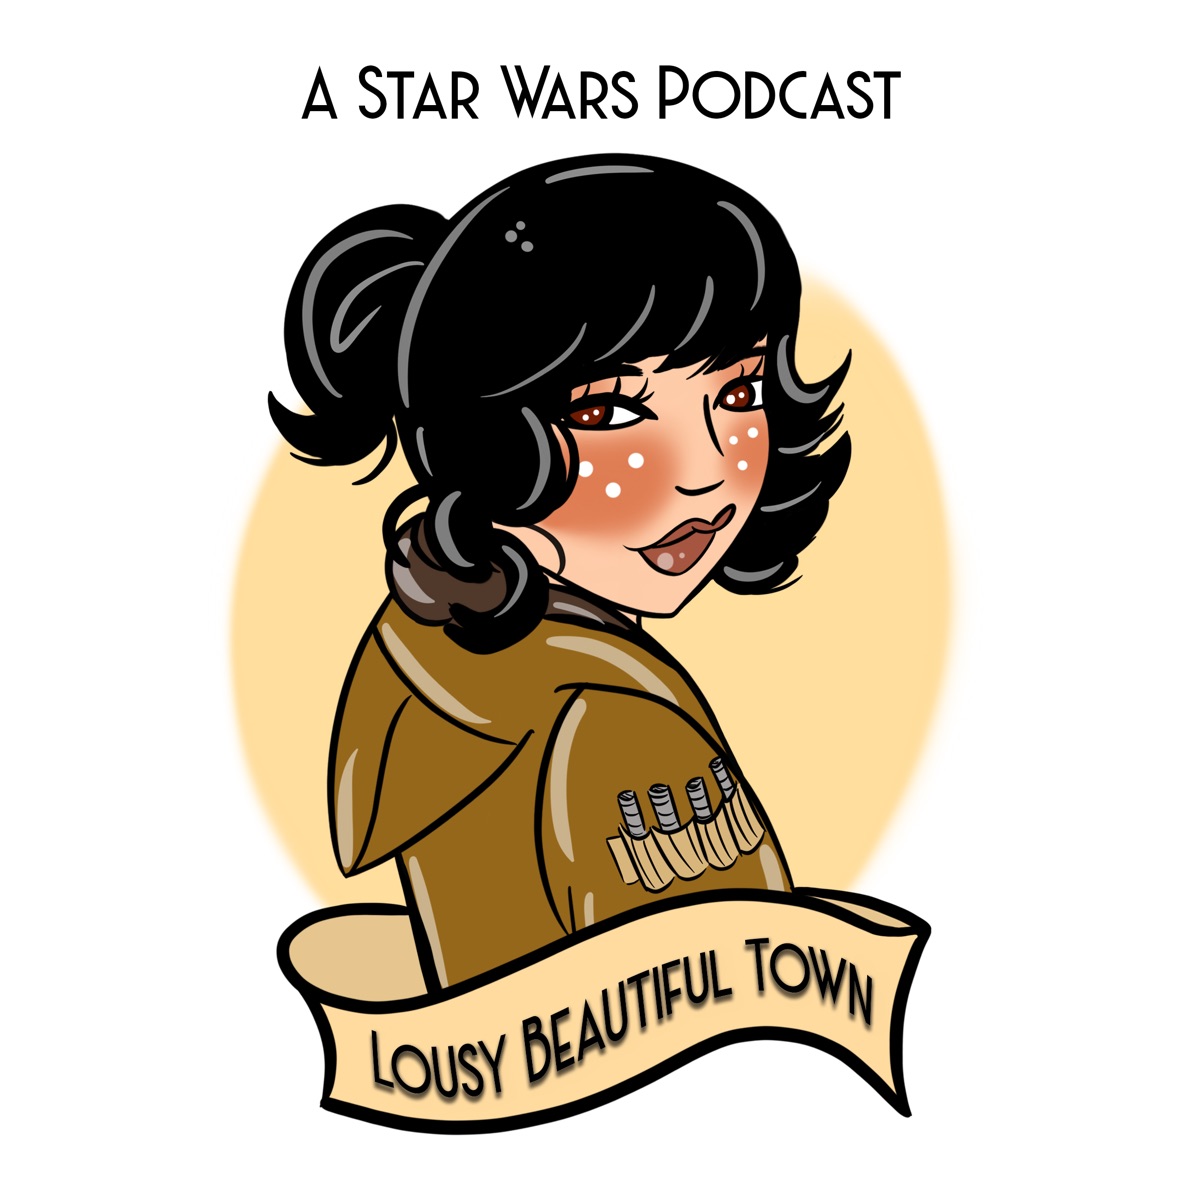 Blue Film To Download On Wap Tract - Episode 14 - Rey Has a Big Fat Dick â€“ Jess and Abby's Lousy Beautiful Town  â€“ Podcast â€“ Podtail